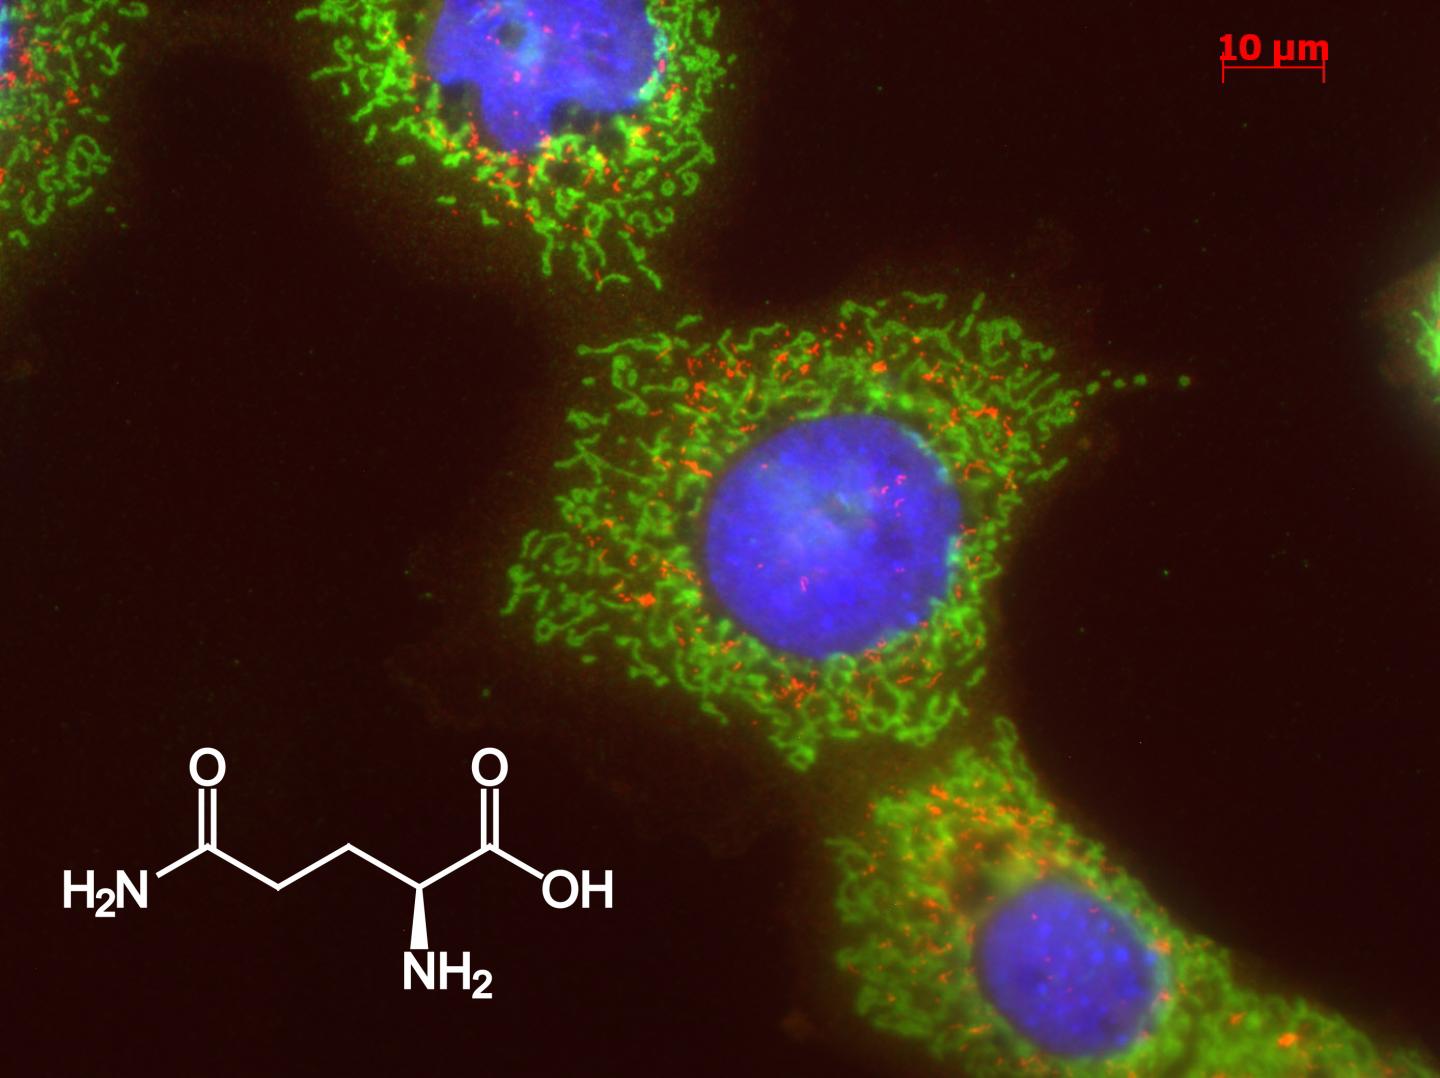 Fluorescent Image of Liver Cells and Chemical Structure of Glutamine